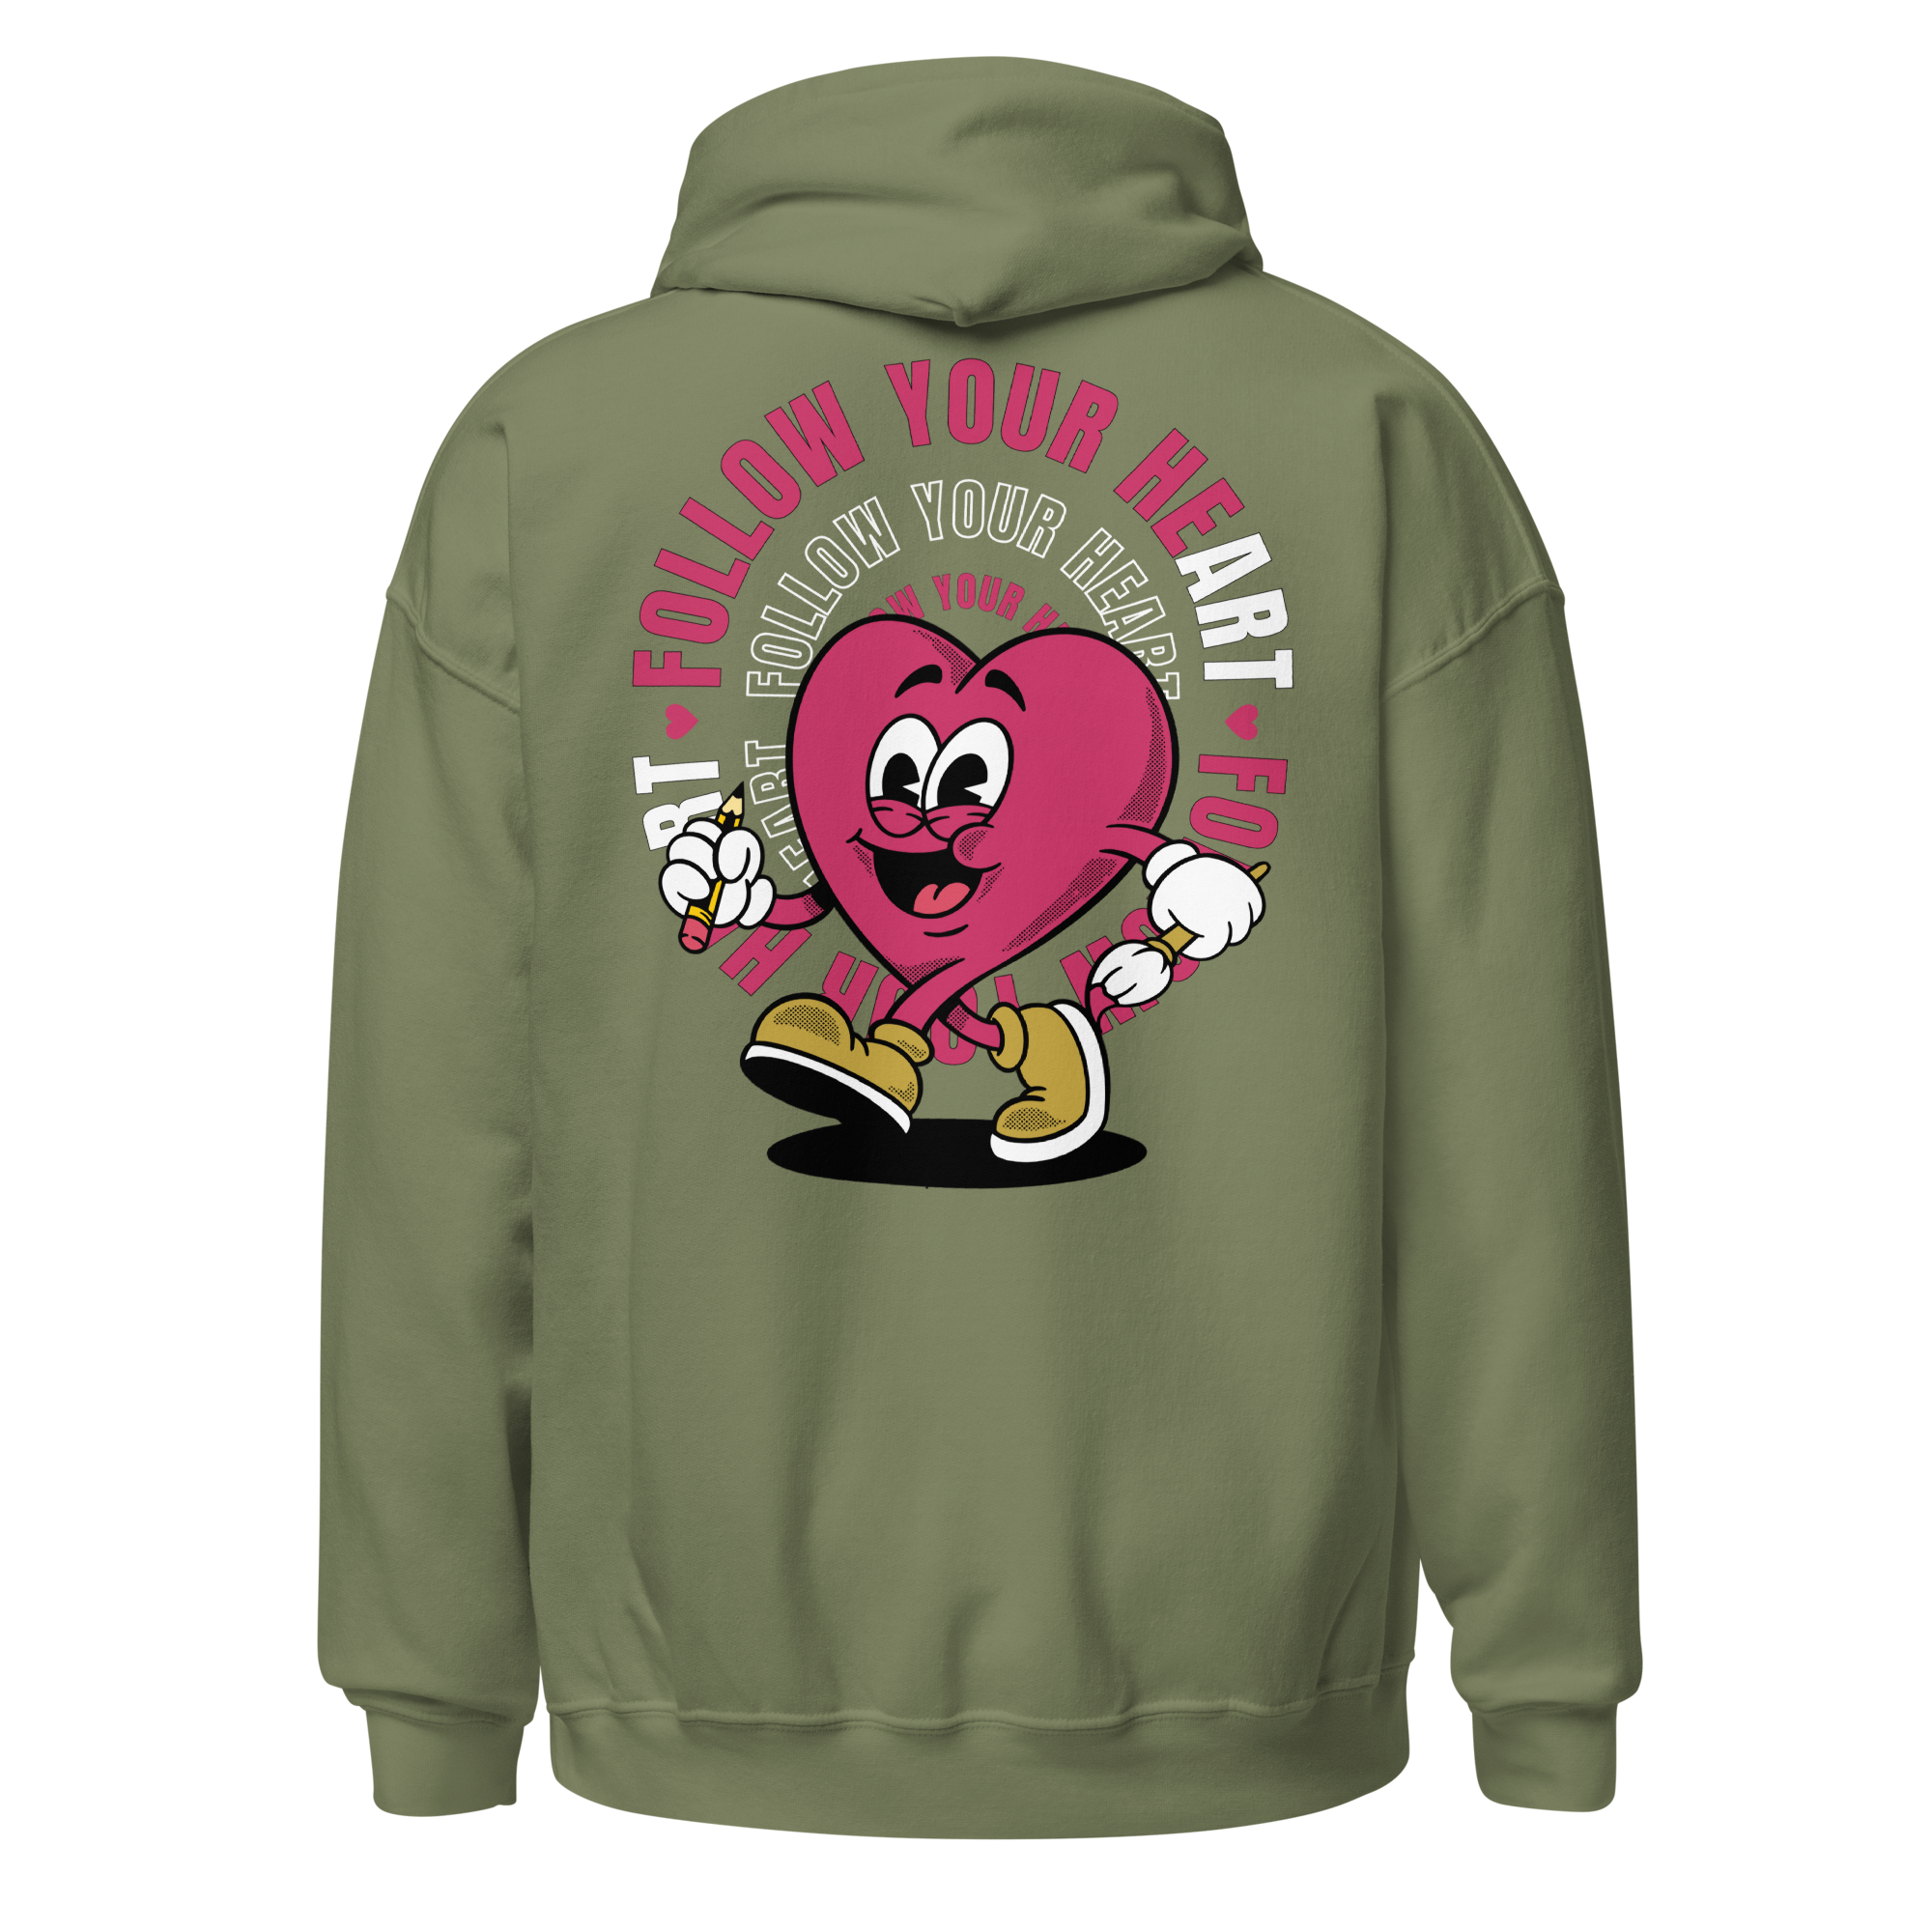 Follow Your Heart Embroidery Hoodie - Pink and Military Green (Unisex)